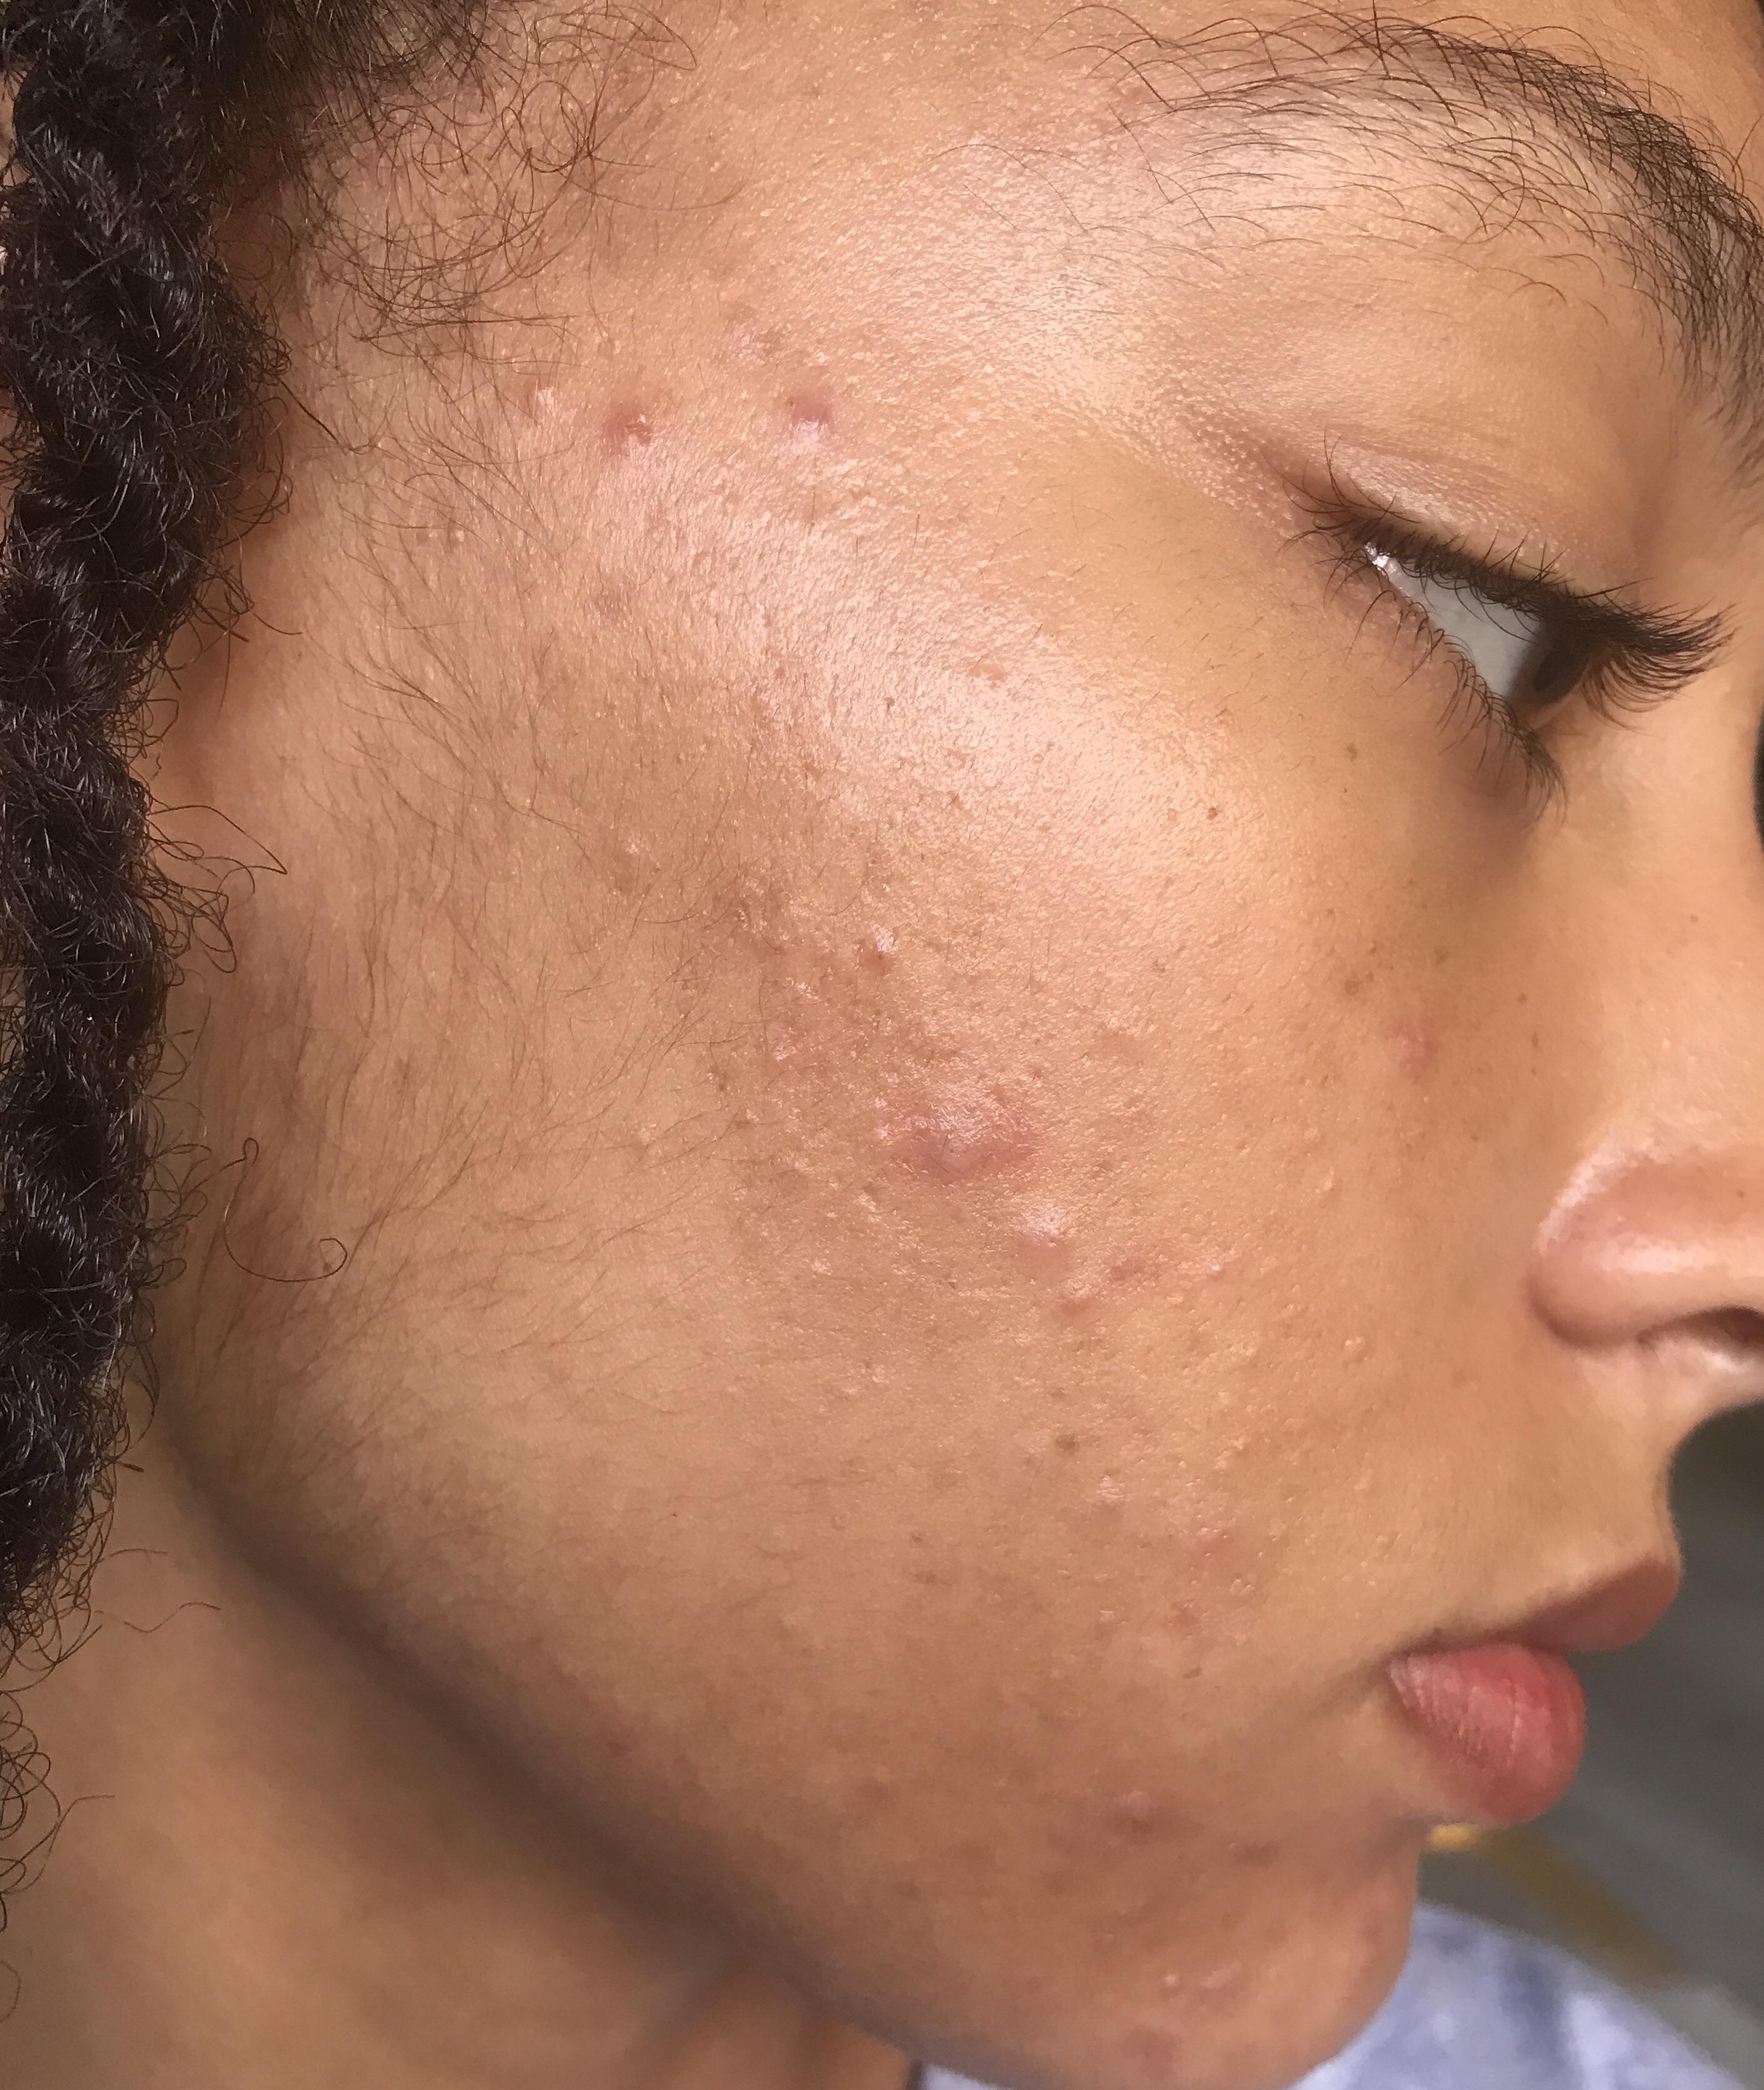 How To Get Rid Of Acne Breakouts A Complete Guide To Clear Skin Neutriherbs Nigeria pic